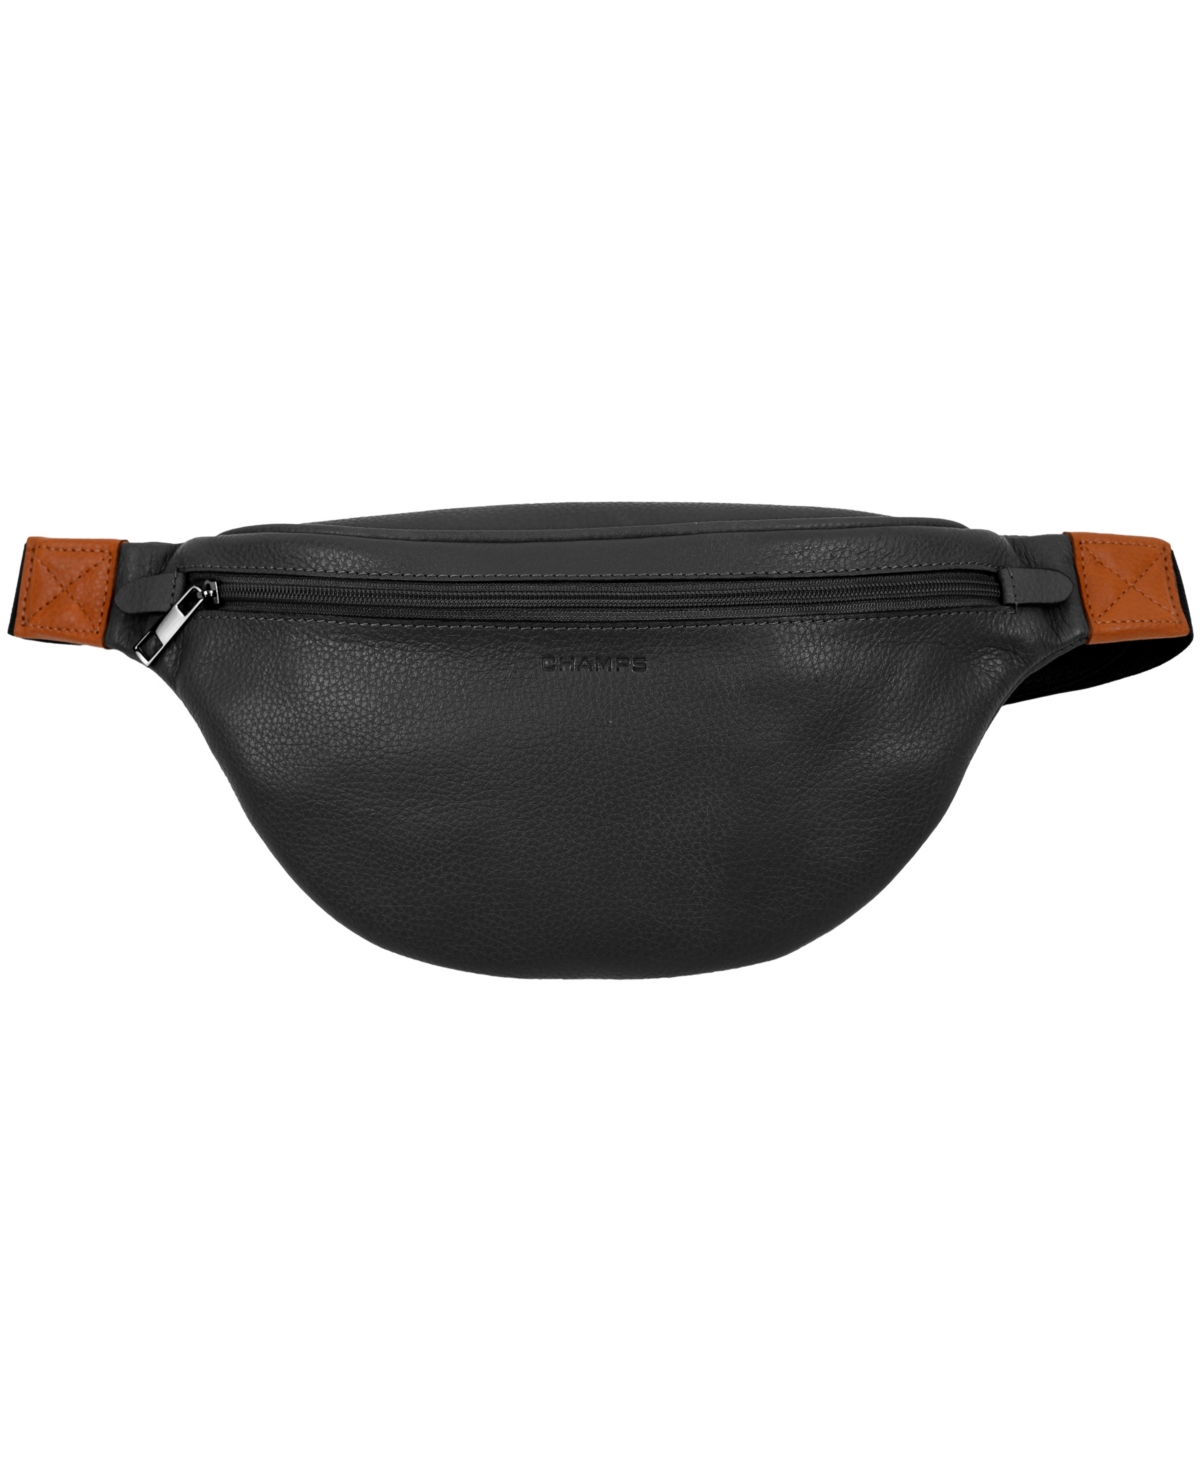 Onyx Leather Waist Pack - Brown